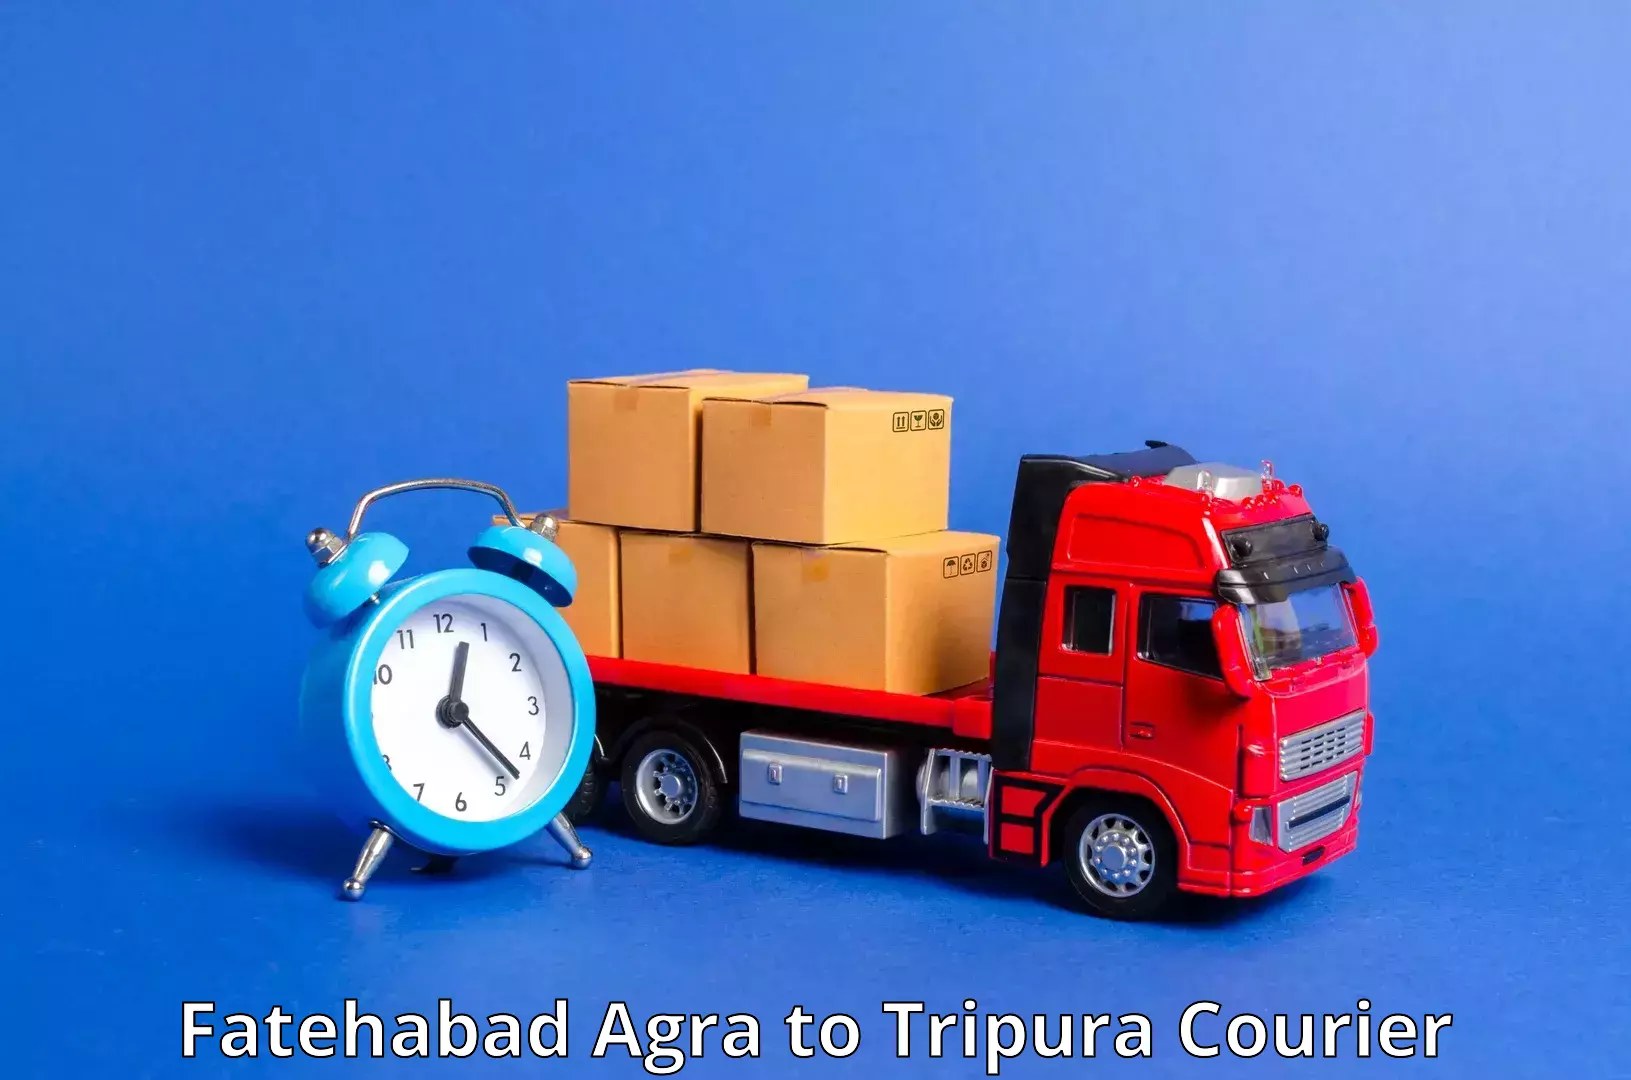 Multi-service courier options Fatehabad Agra to Kailashahar